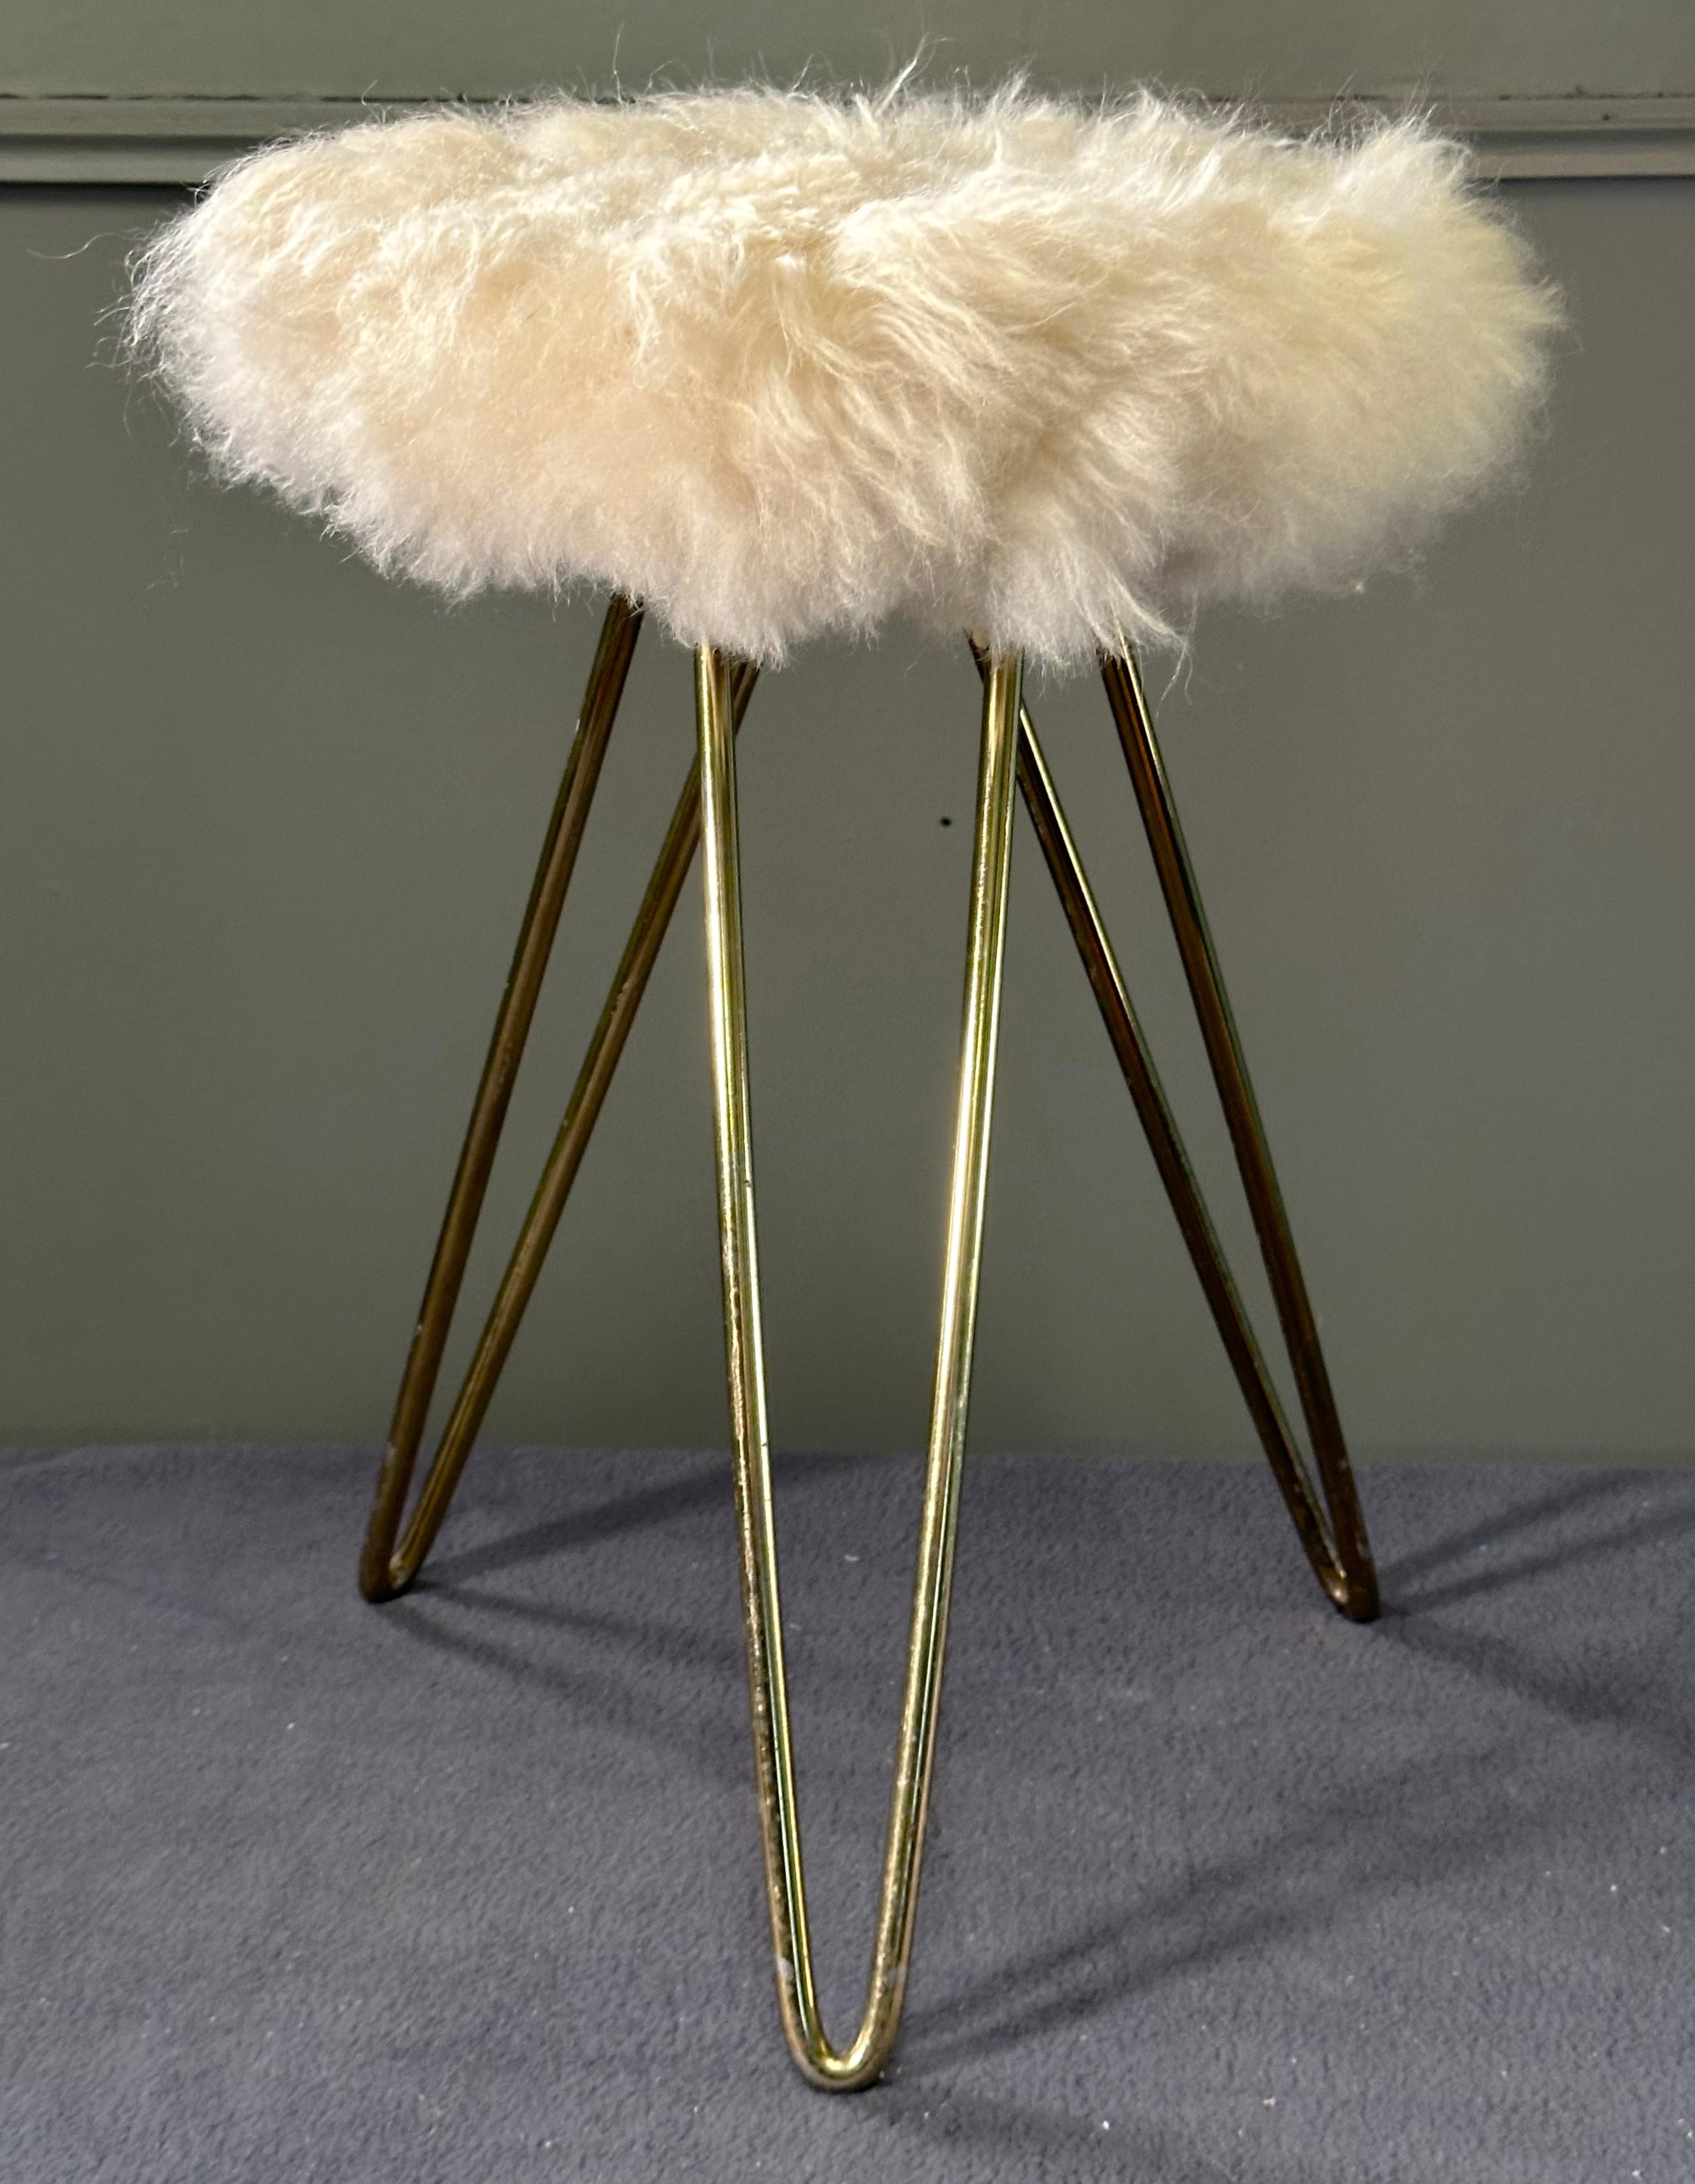 Mid-20th Century Mid-Century Hairpin Legs Fur Stool, 1950s, France For Sale